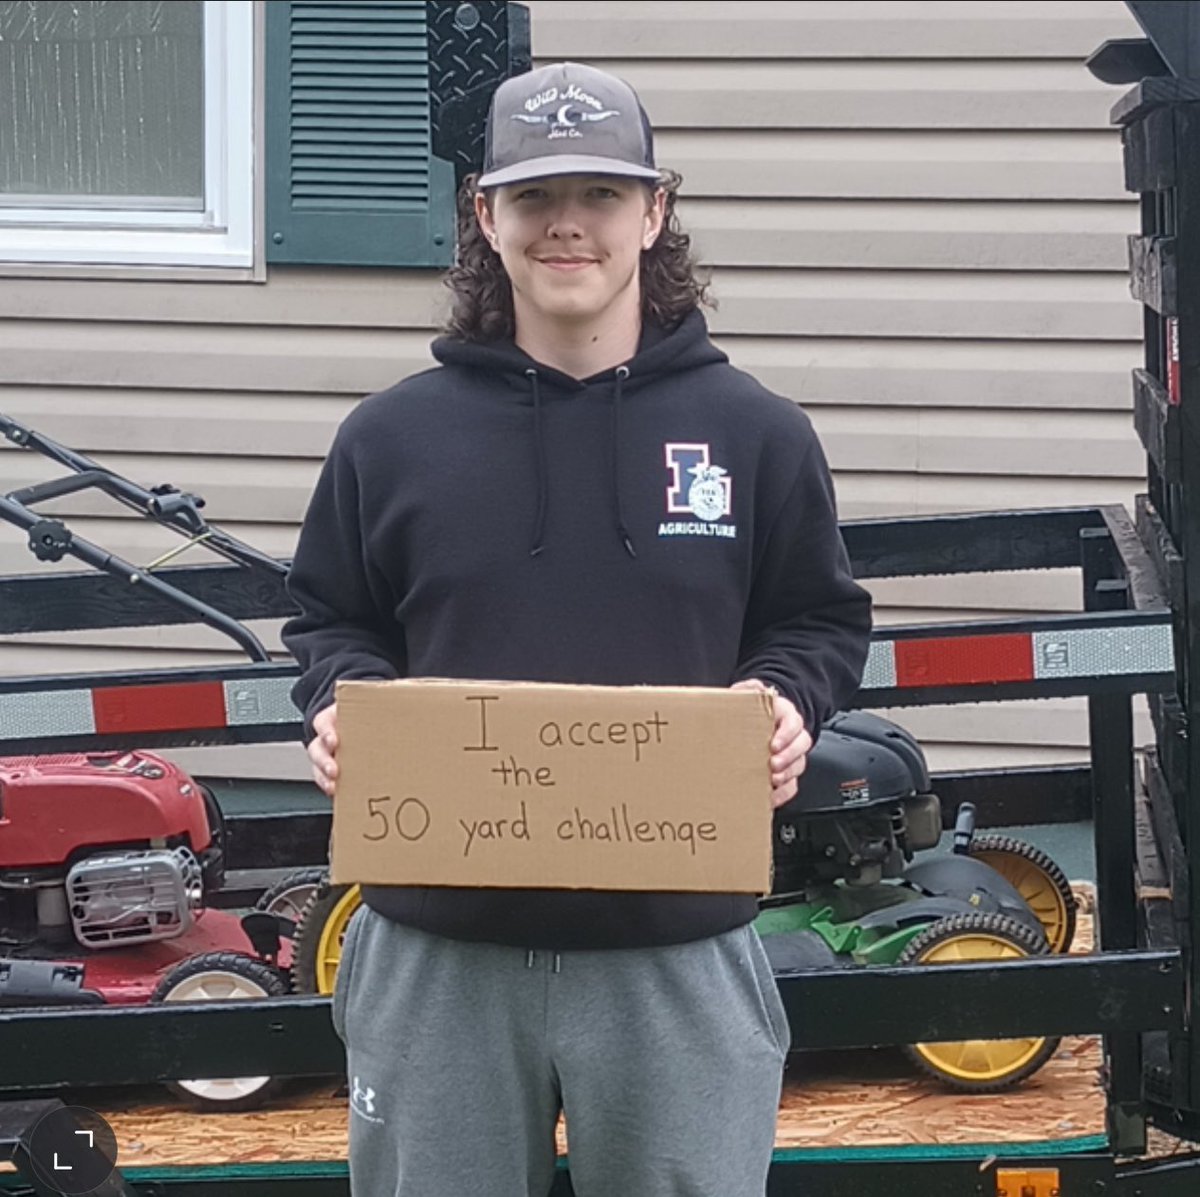 It brings me great joy to share with you the news of a new addition to our family. Please join me in welcoming Garret of Bealeton, VA to our fold! Garret has stepped up & accepted our 50 yard challenge .By embracing this challenge, he has shown us that he is committed to